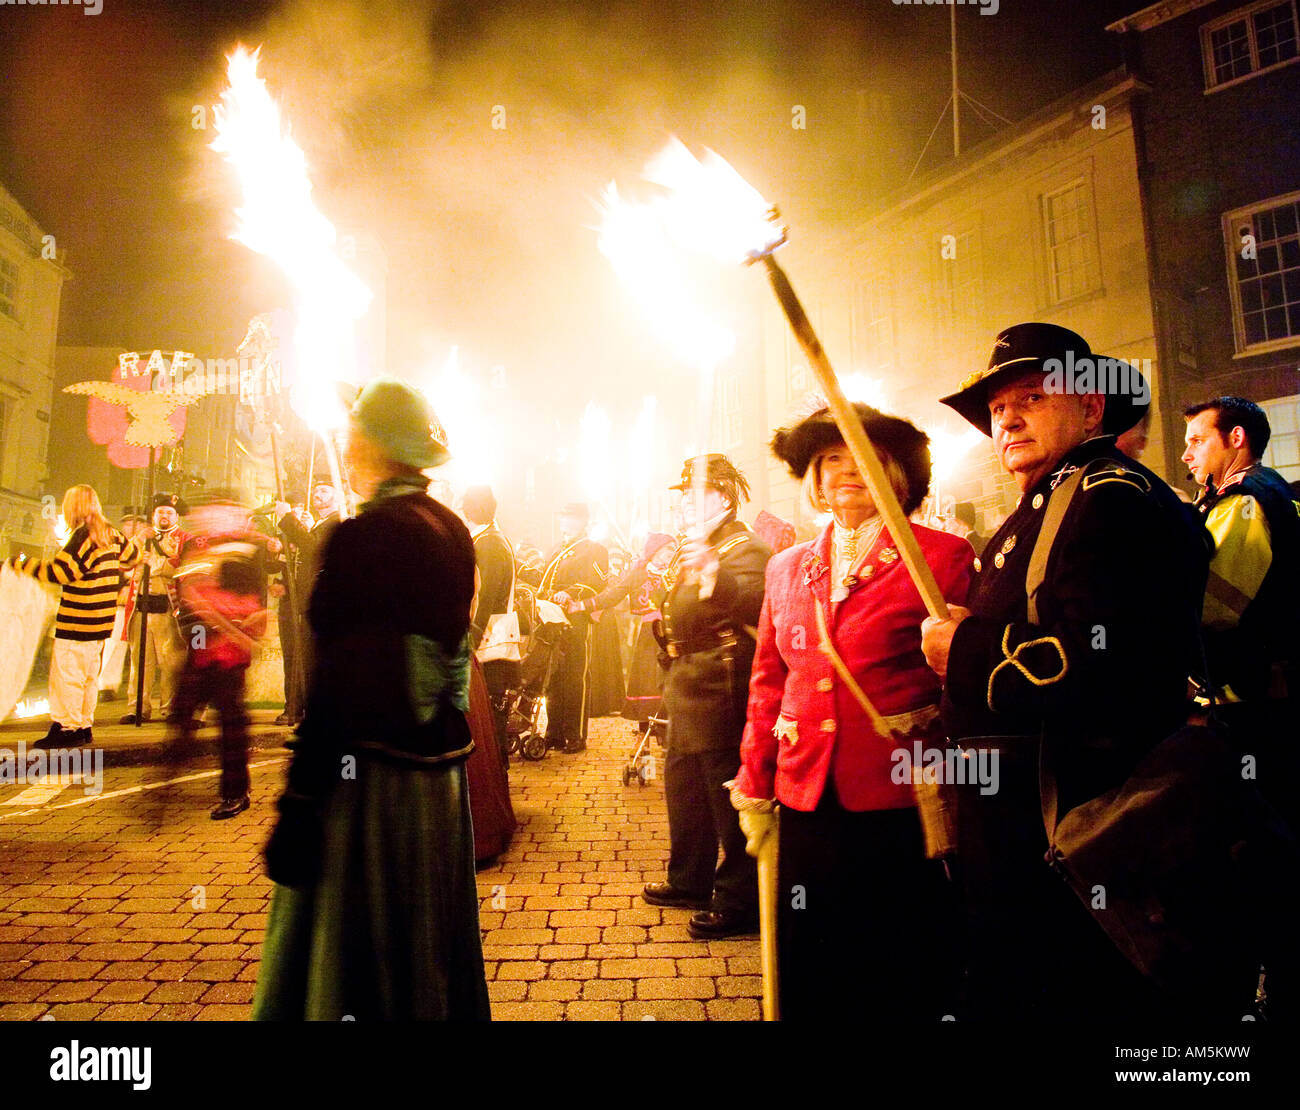 Fackelzug At The Lewes Fire Festival Sussex UK Europe Stockfoto